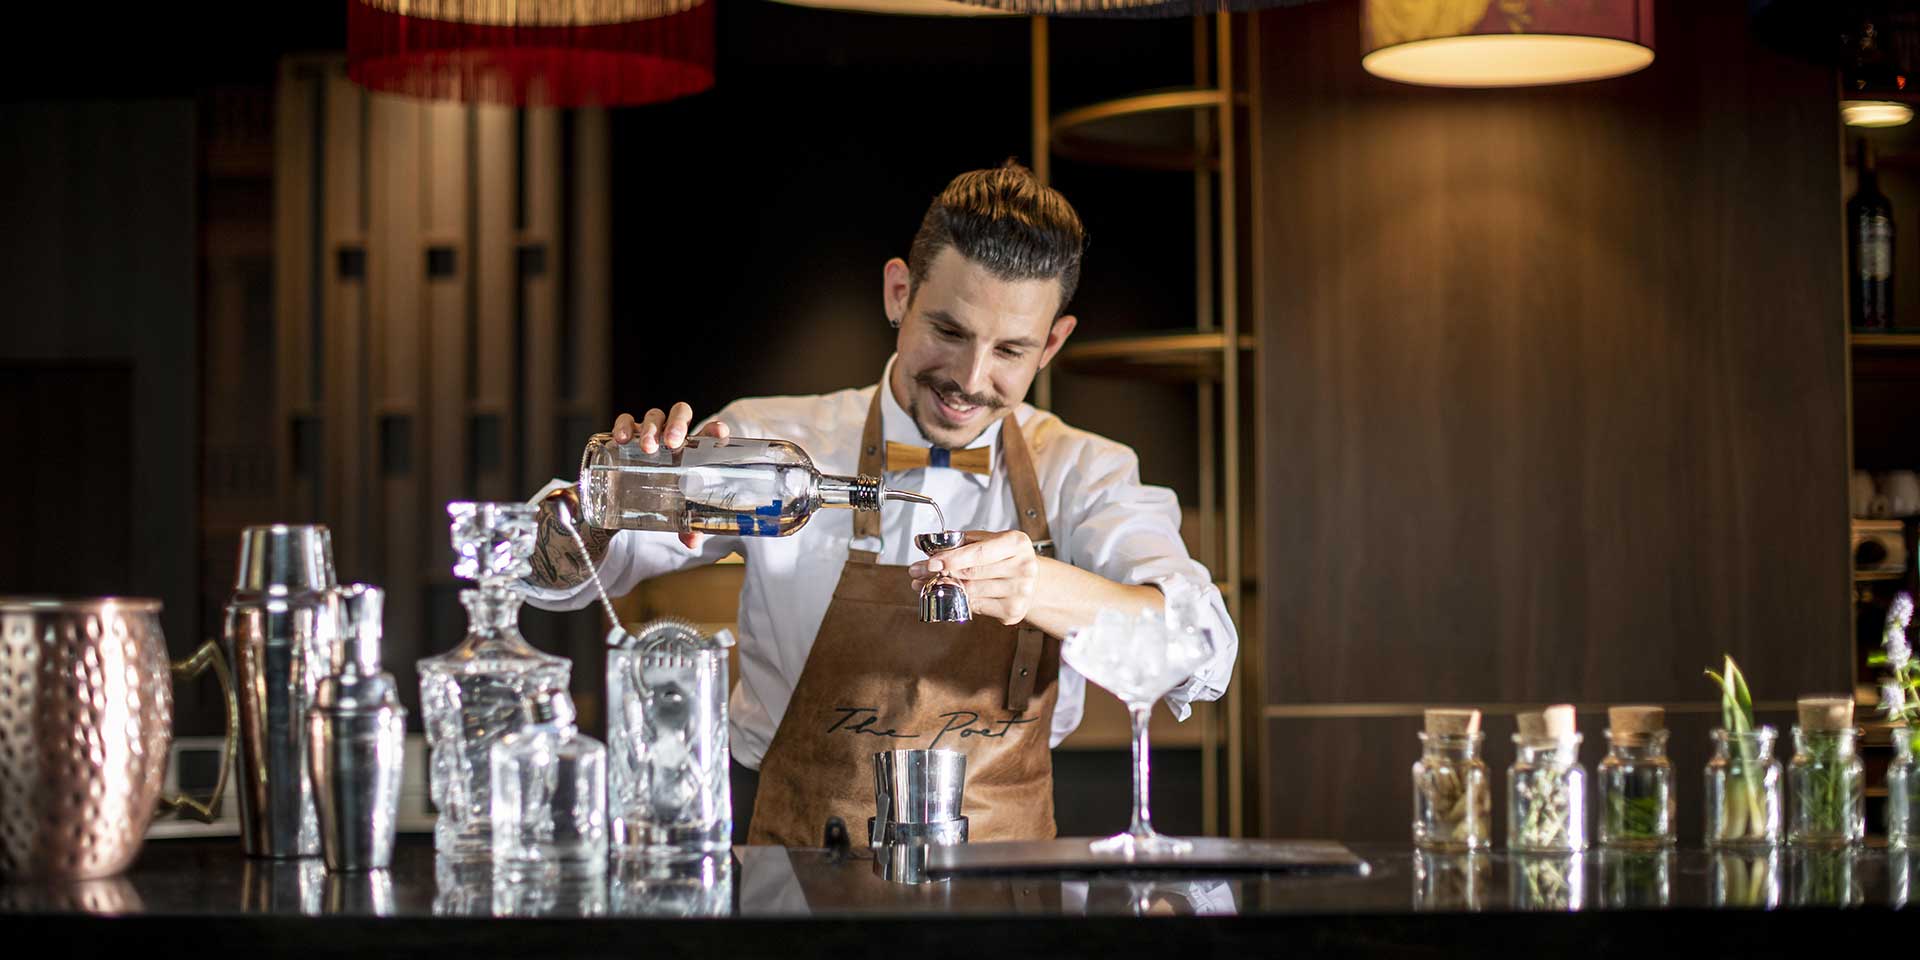 How This Brussels Mixologist Shakes Up the Cocktail Scene in a Beer-Centric Town